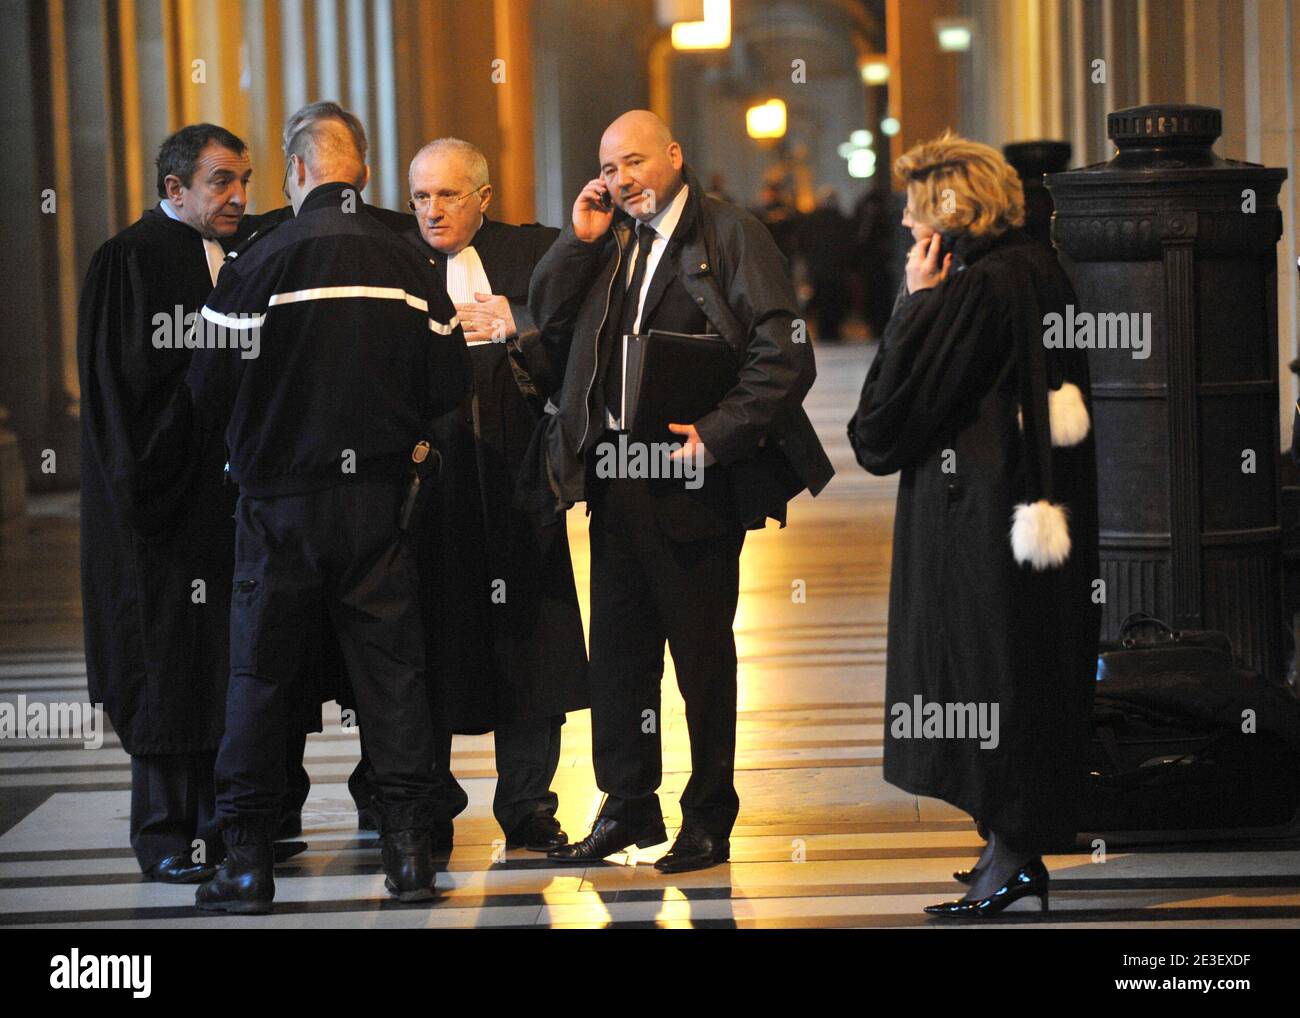 Lawyers of Yvan Colonna Pascal Garbarini, Antoine Sollacaro, Patrick Maisonneuve and Philippe Dehapiot attend the Yvan Colonna Trial at the Paris courthouse, in Paris, France, on February 9, 2009. Photo by Mousse/ABACAPRESS.COM Stock Photo